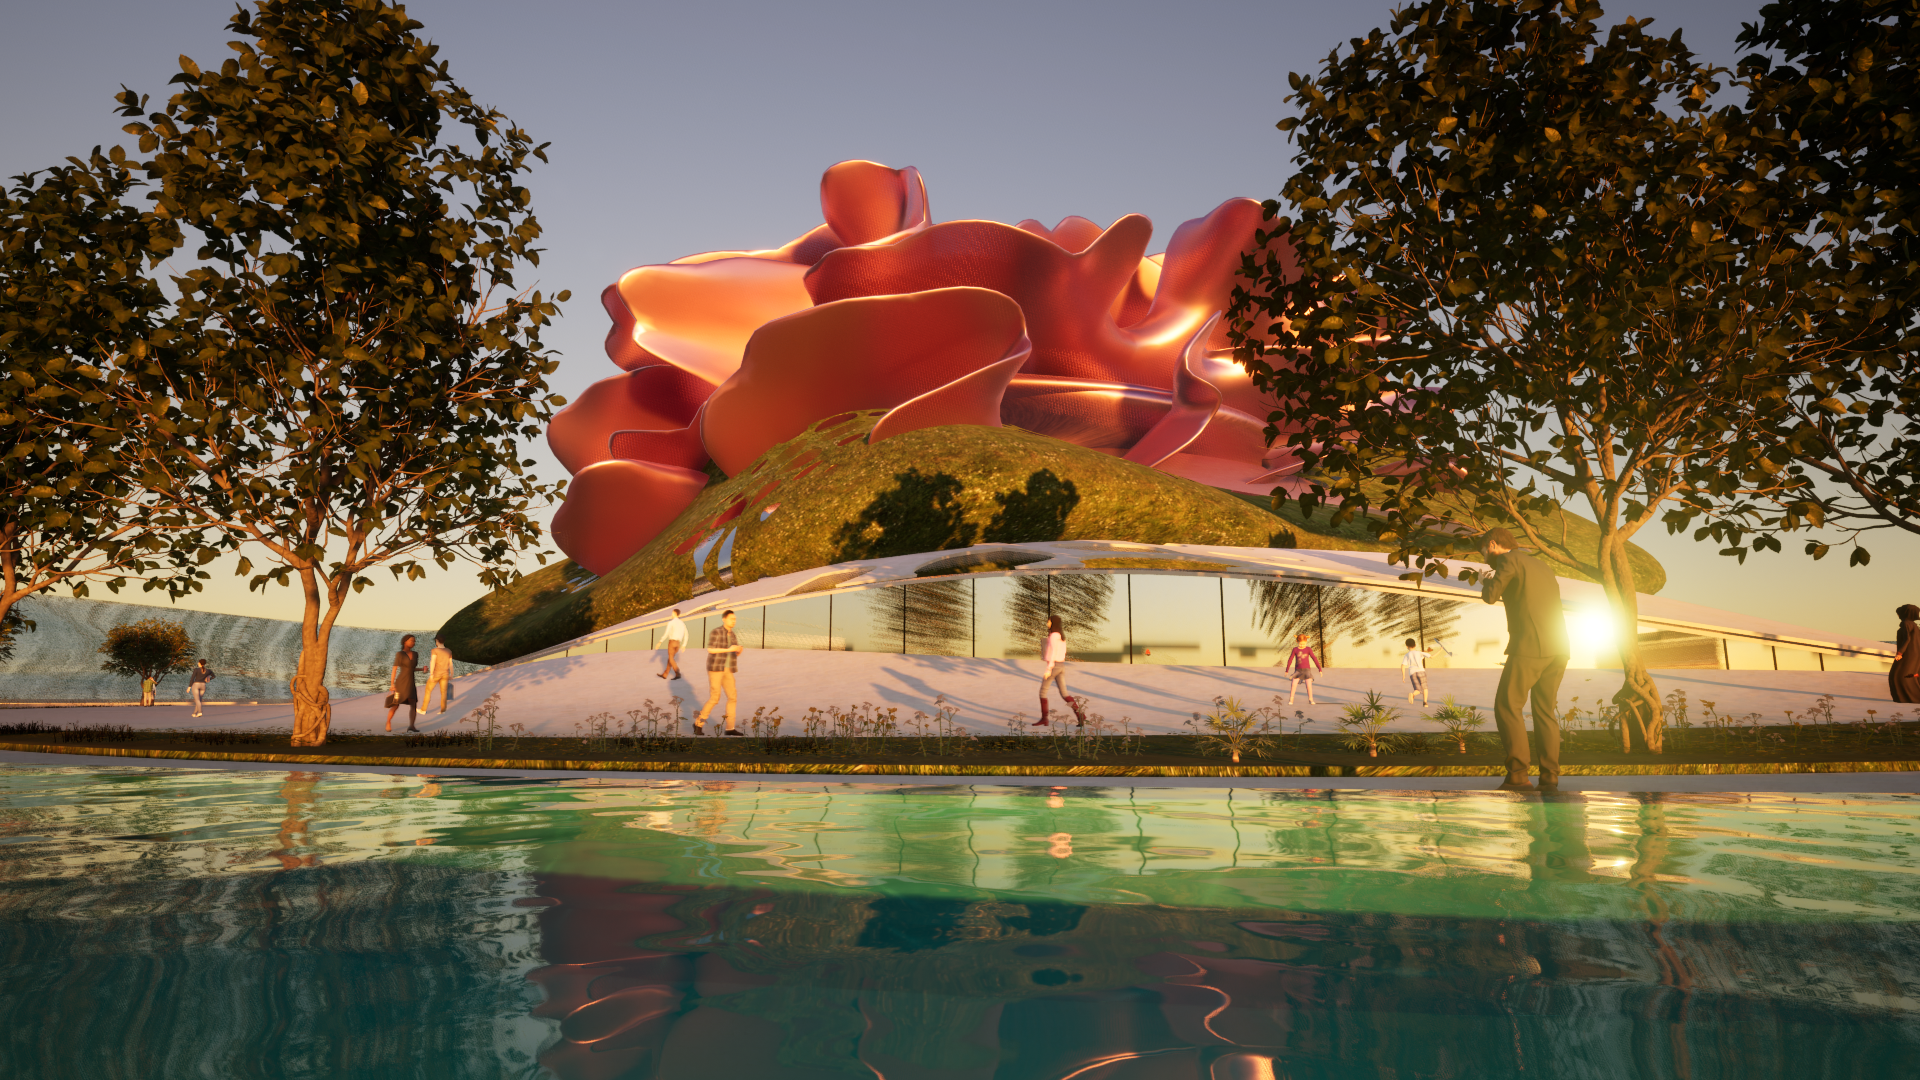 Debbie-Flevotomou-Architects-The-Great-Reef-2024-Kinetic-Architecture-Parametric-design-4.png